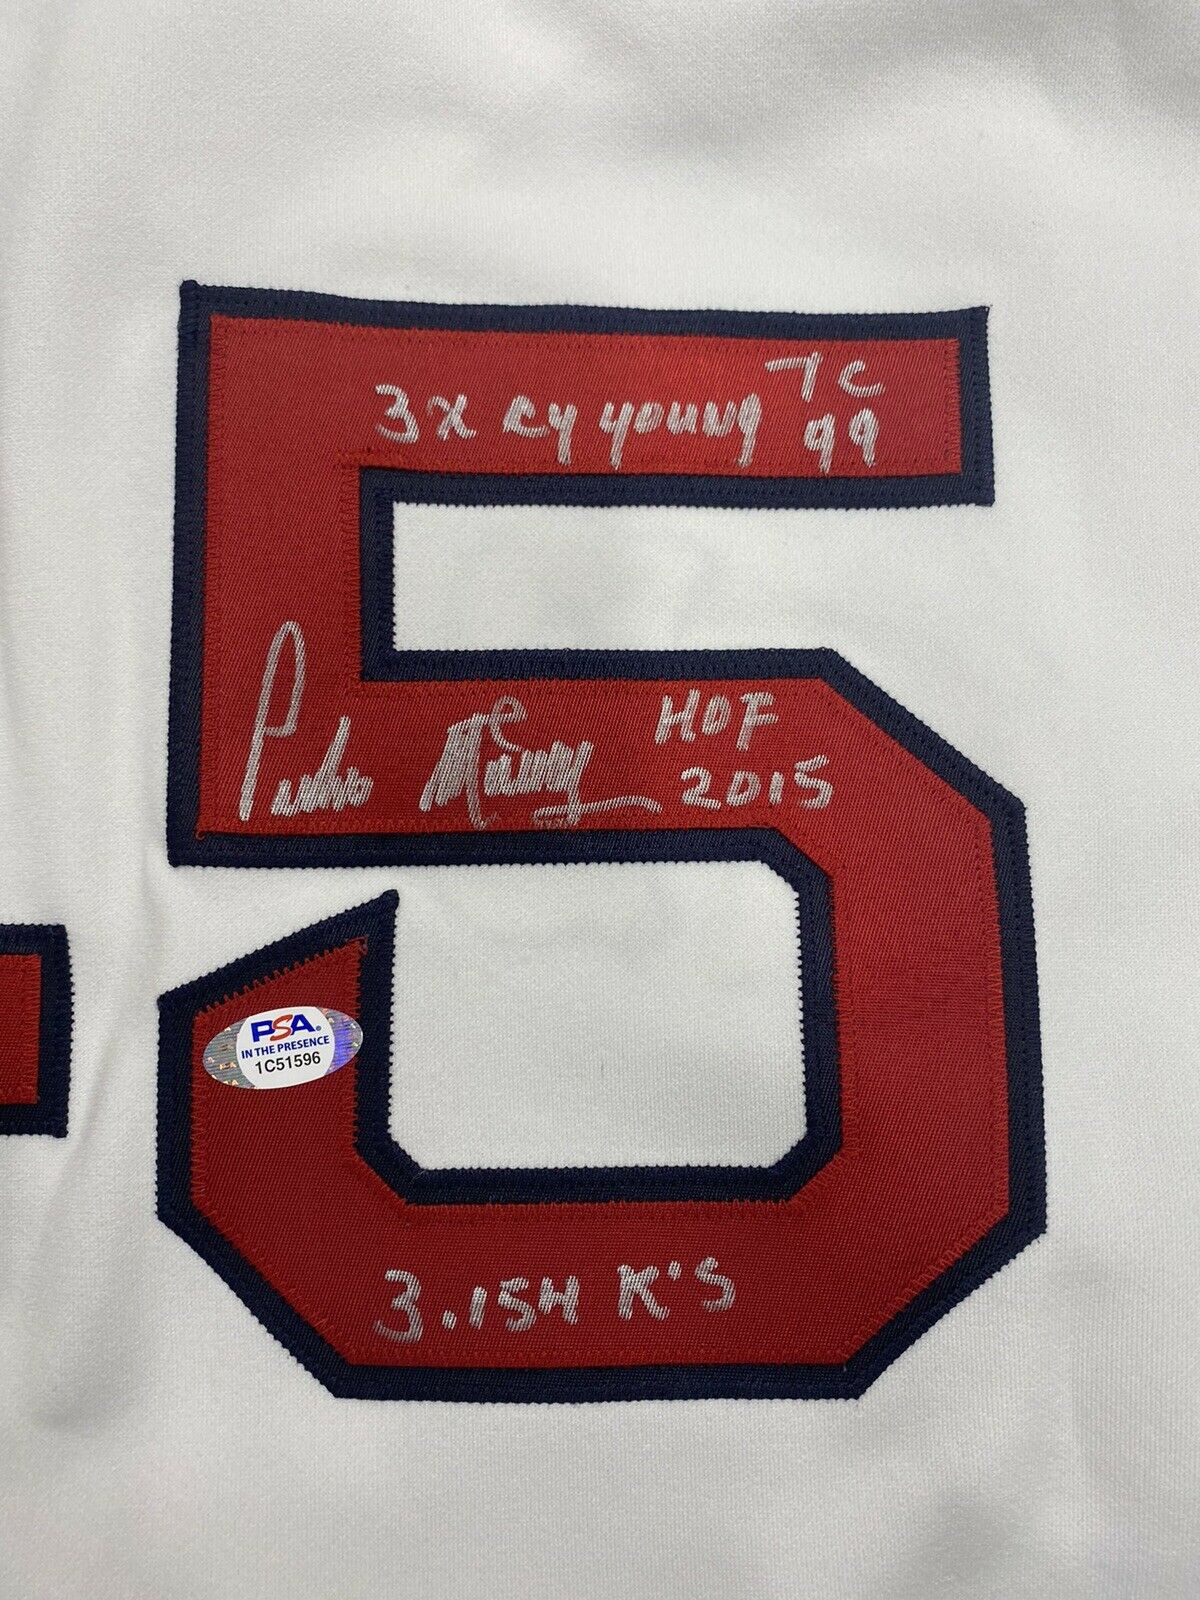 Pedro Martinez Signed Authentic Russell Red Sox Stat Jersey PSA Witness